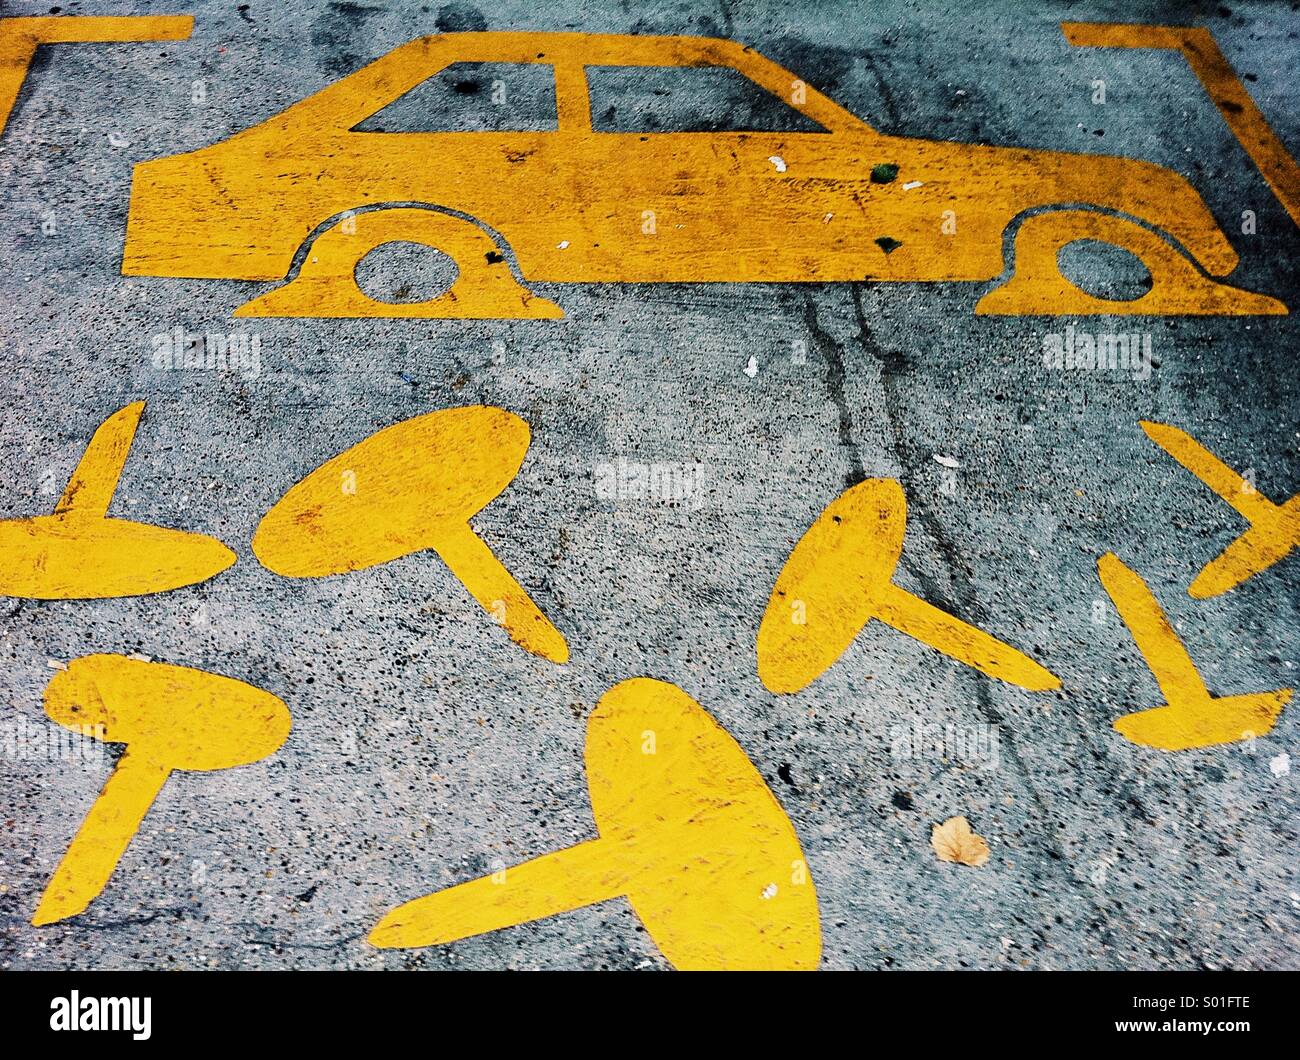 Street art on a pavement depicting a car with flat tyres and lots of falling drawing pins. Stock Photo